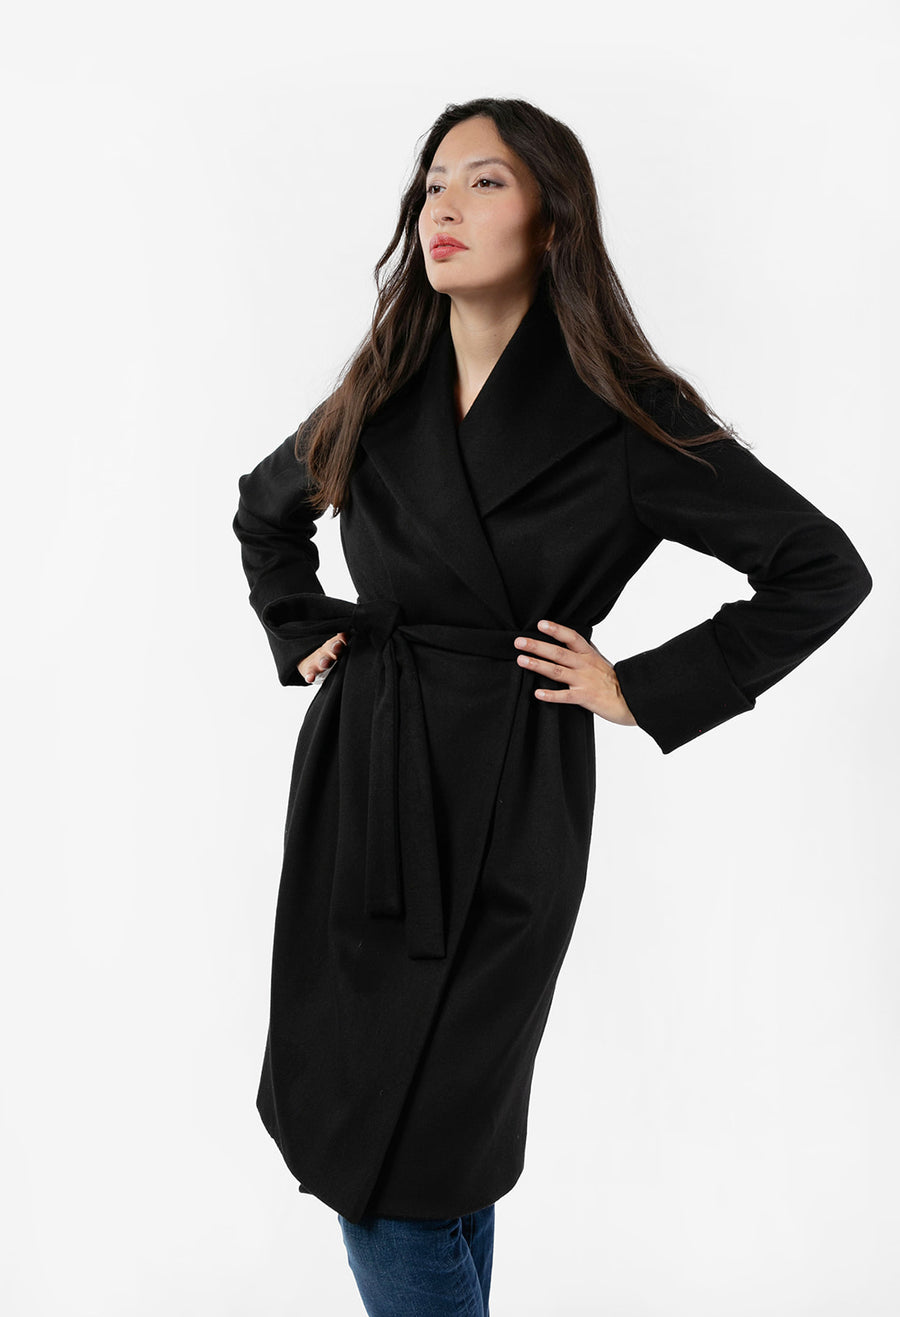 The Southport Overcoat - Black